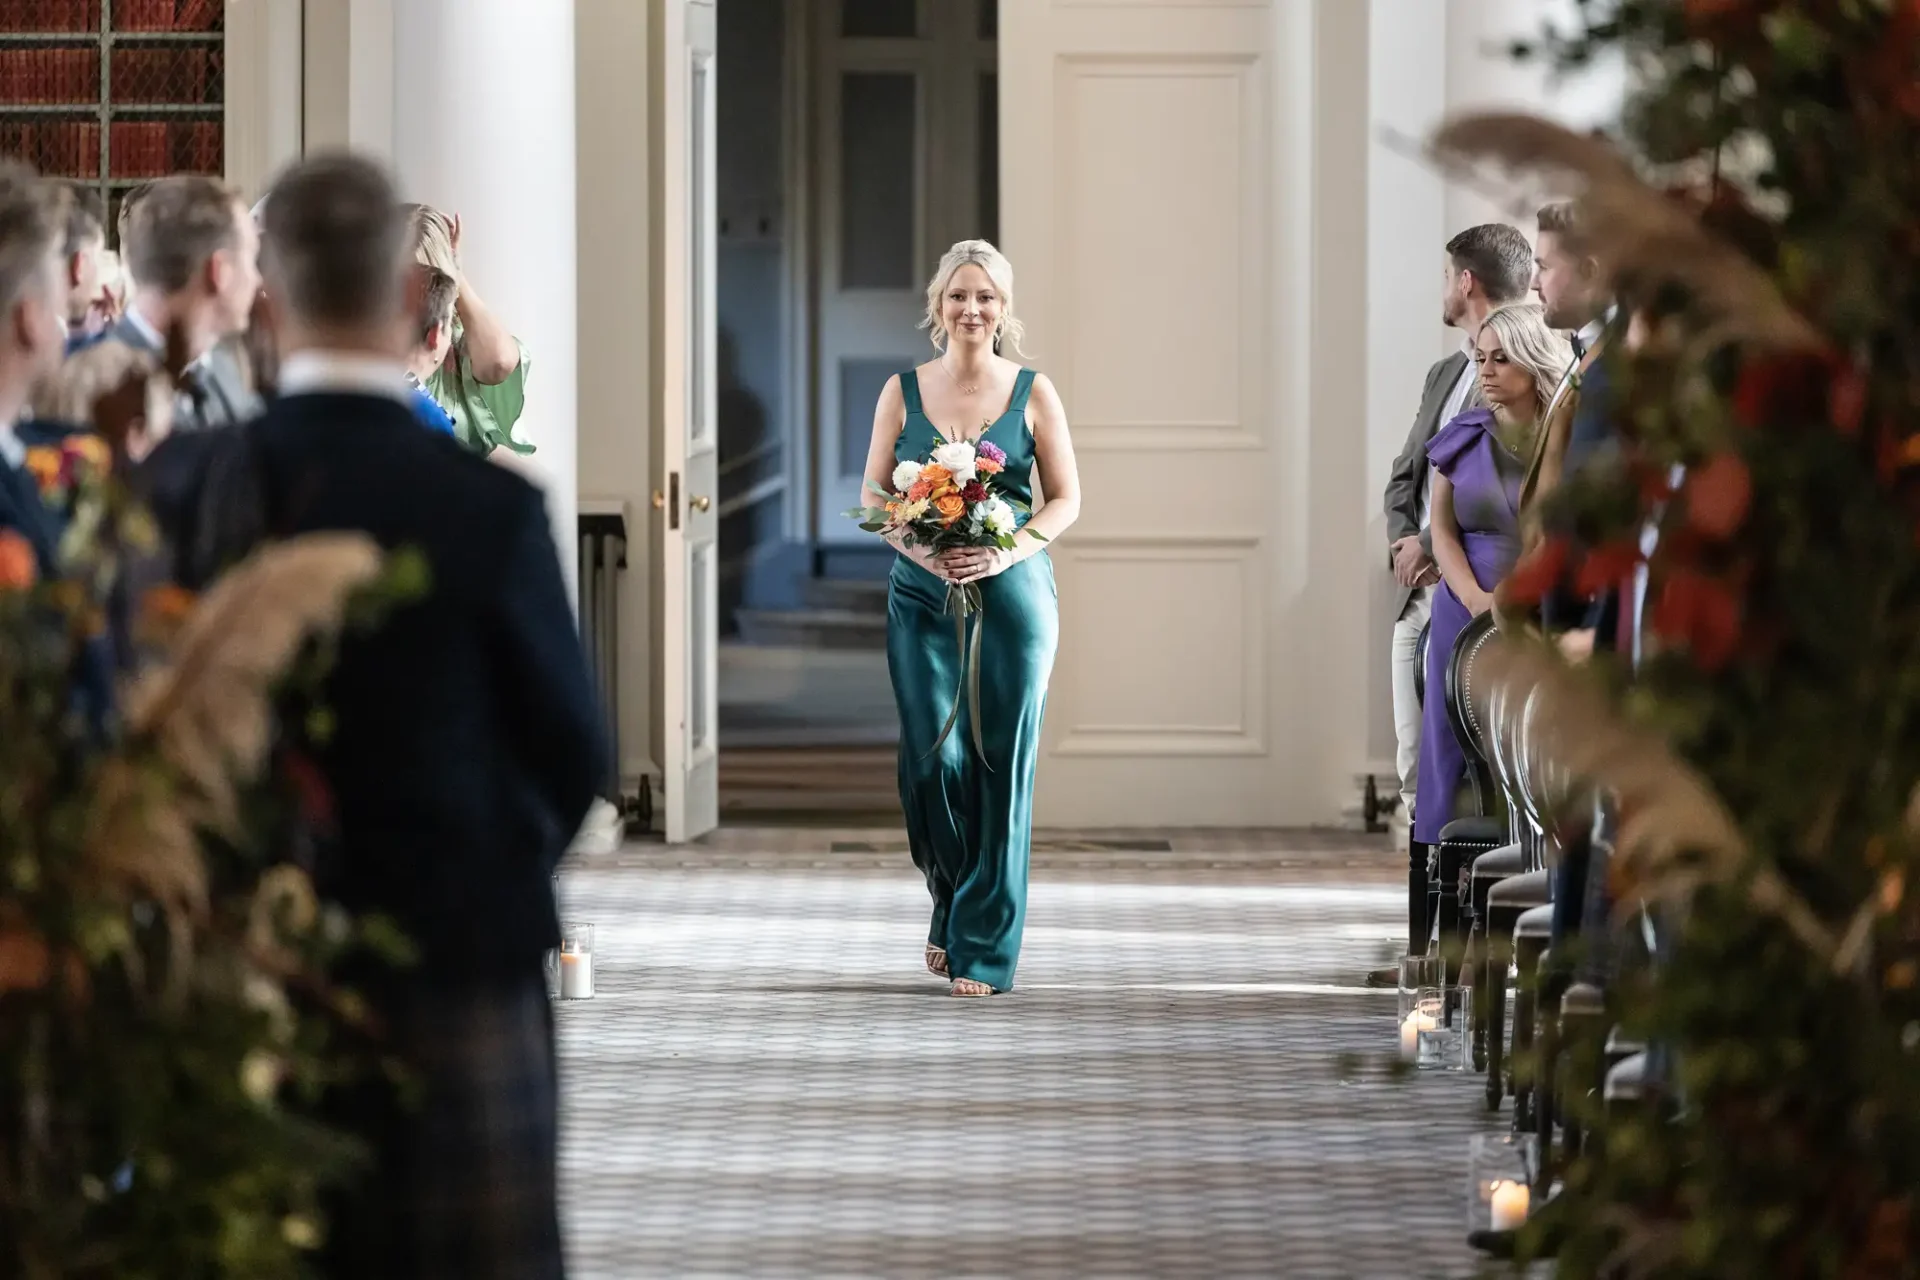 A woman in a teal dress walks down the aisle holding a bouquet, smiling at guests during a wedding ceremony.